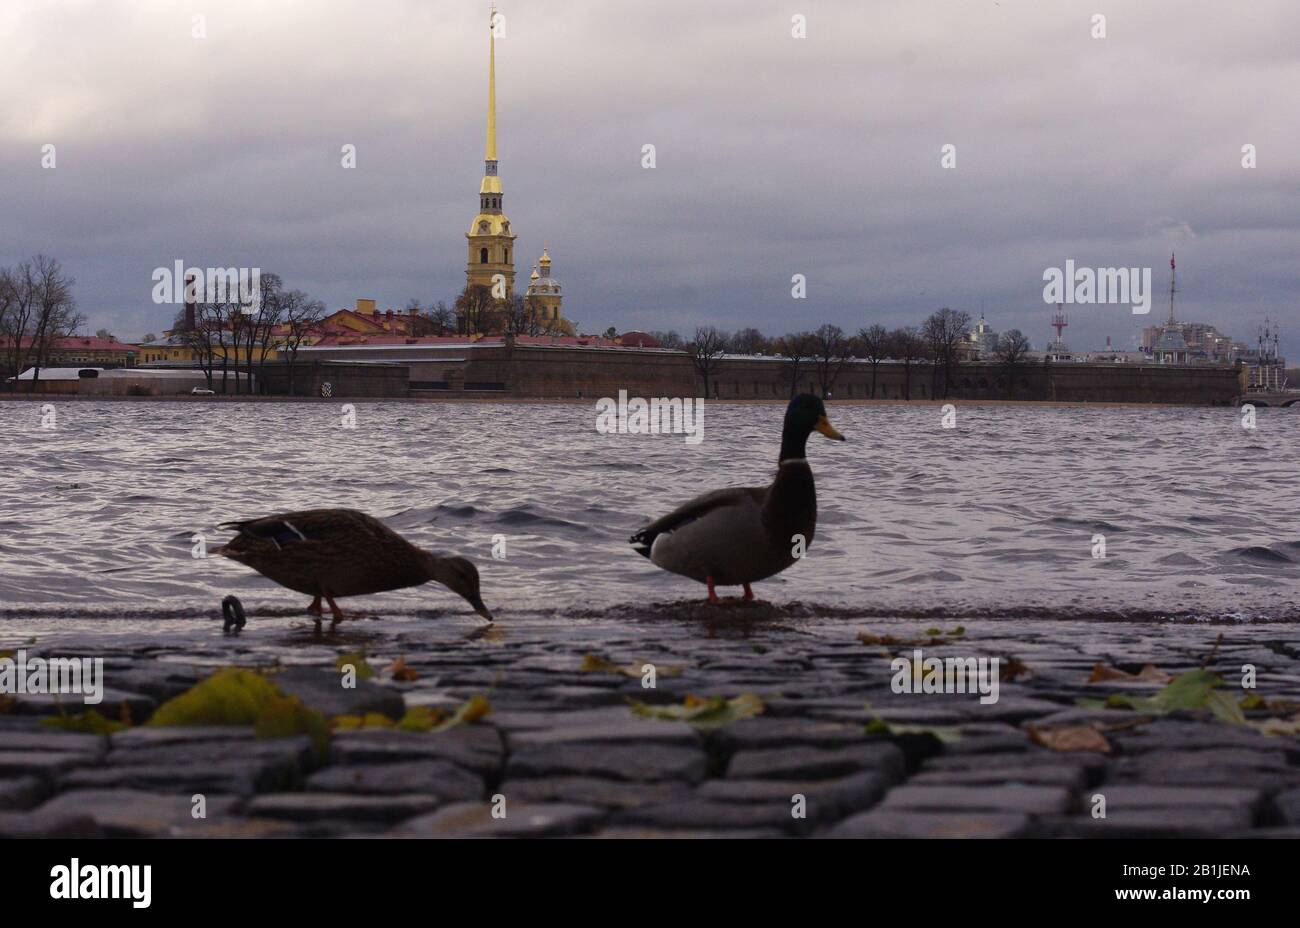 Ducks on a stone block on the background of Peter and Paul Fortress in St. Petersburg. Stock Photo